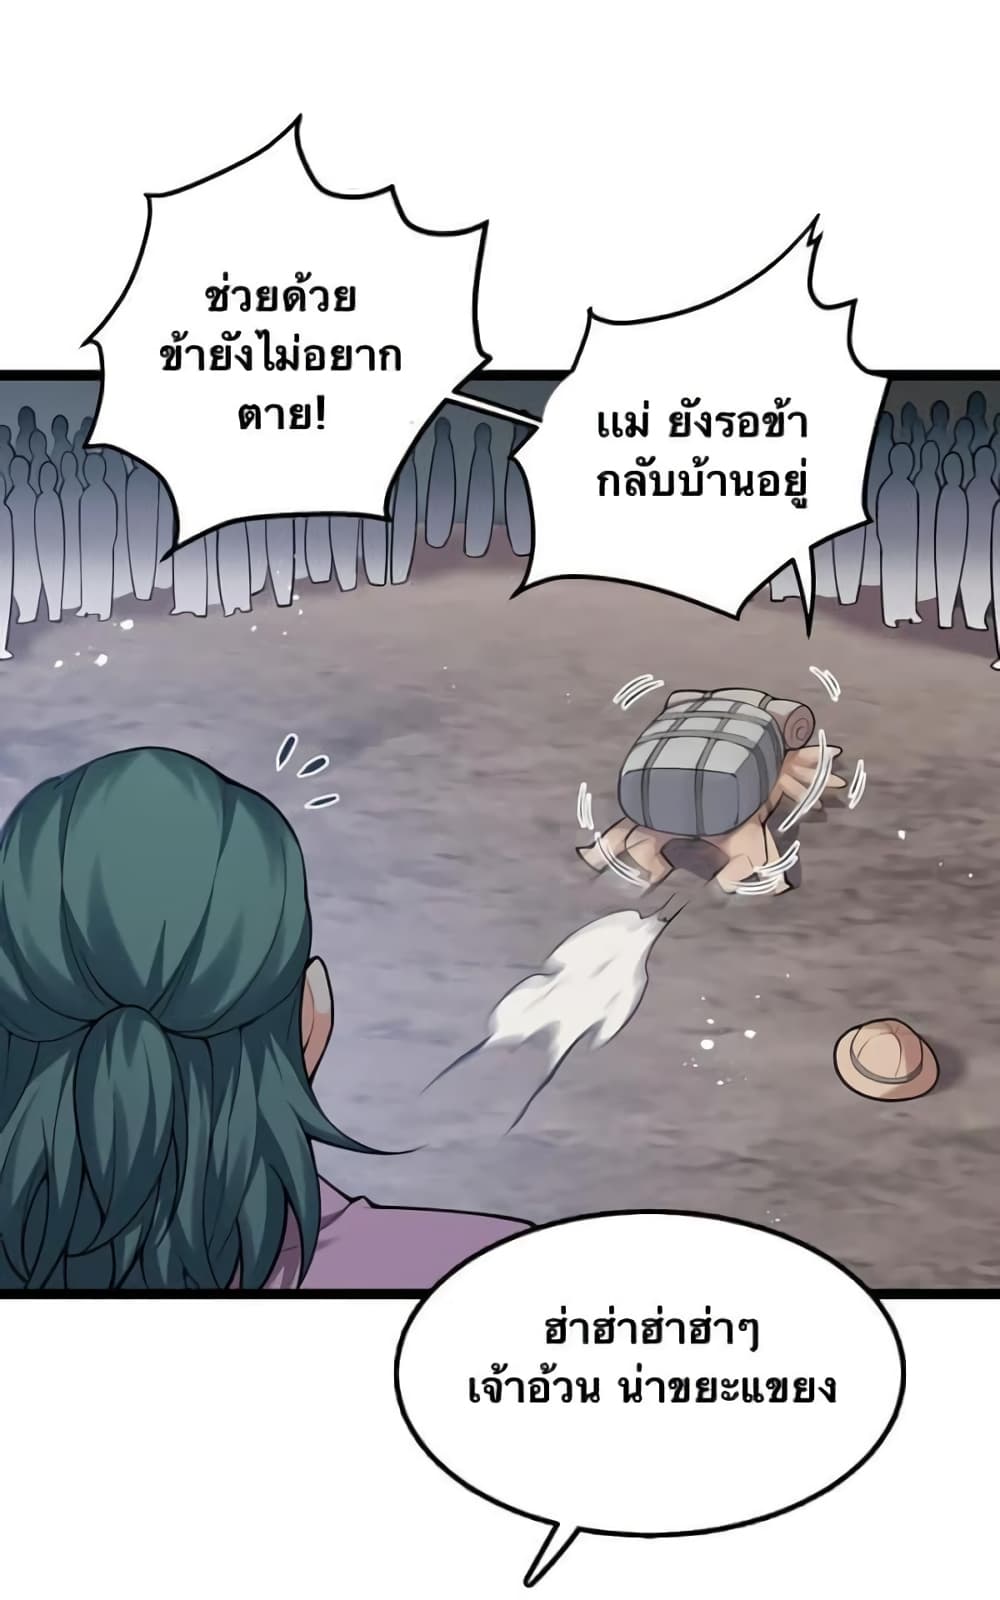 Godsian Masian from Another World 73 แปลไทย